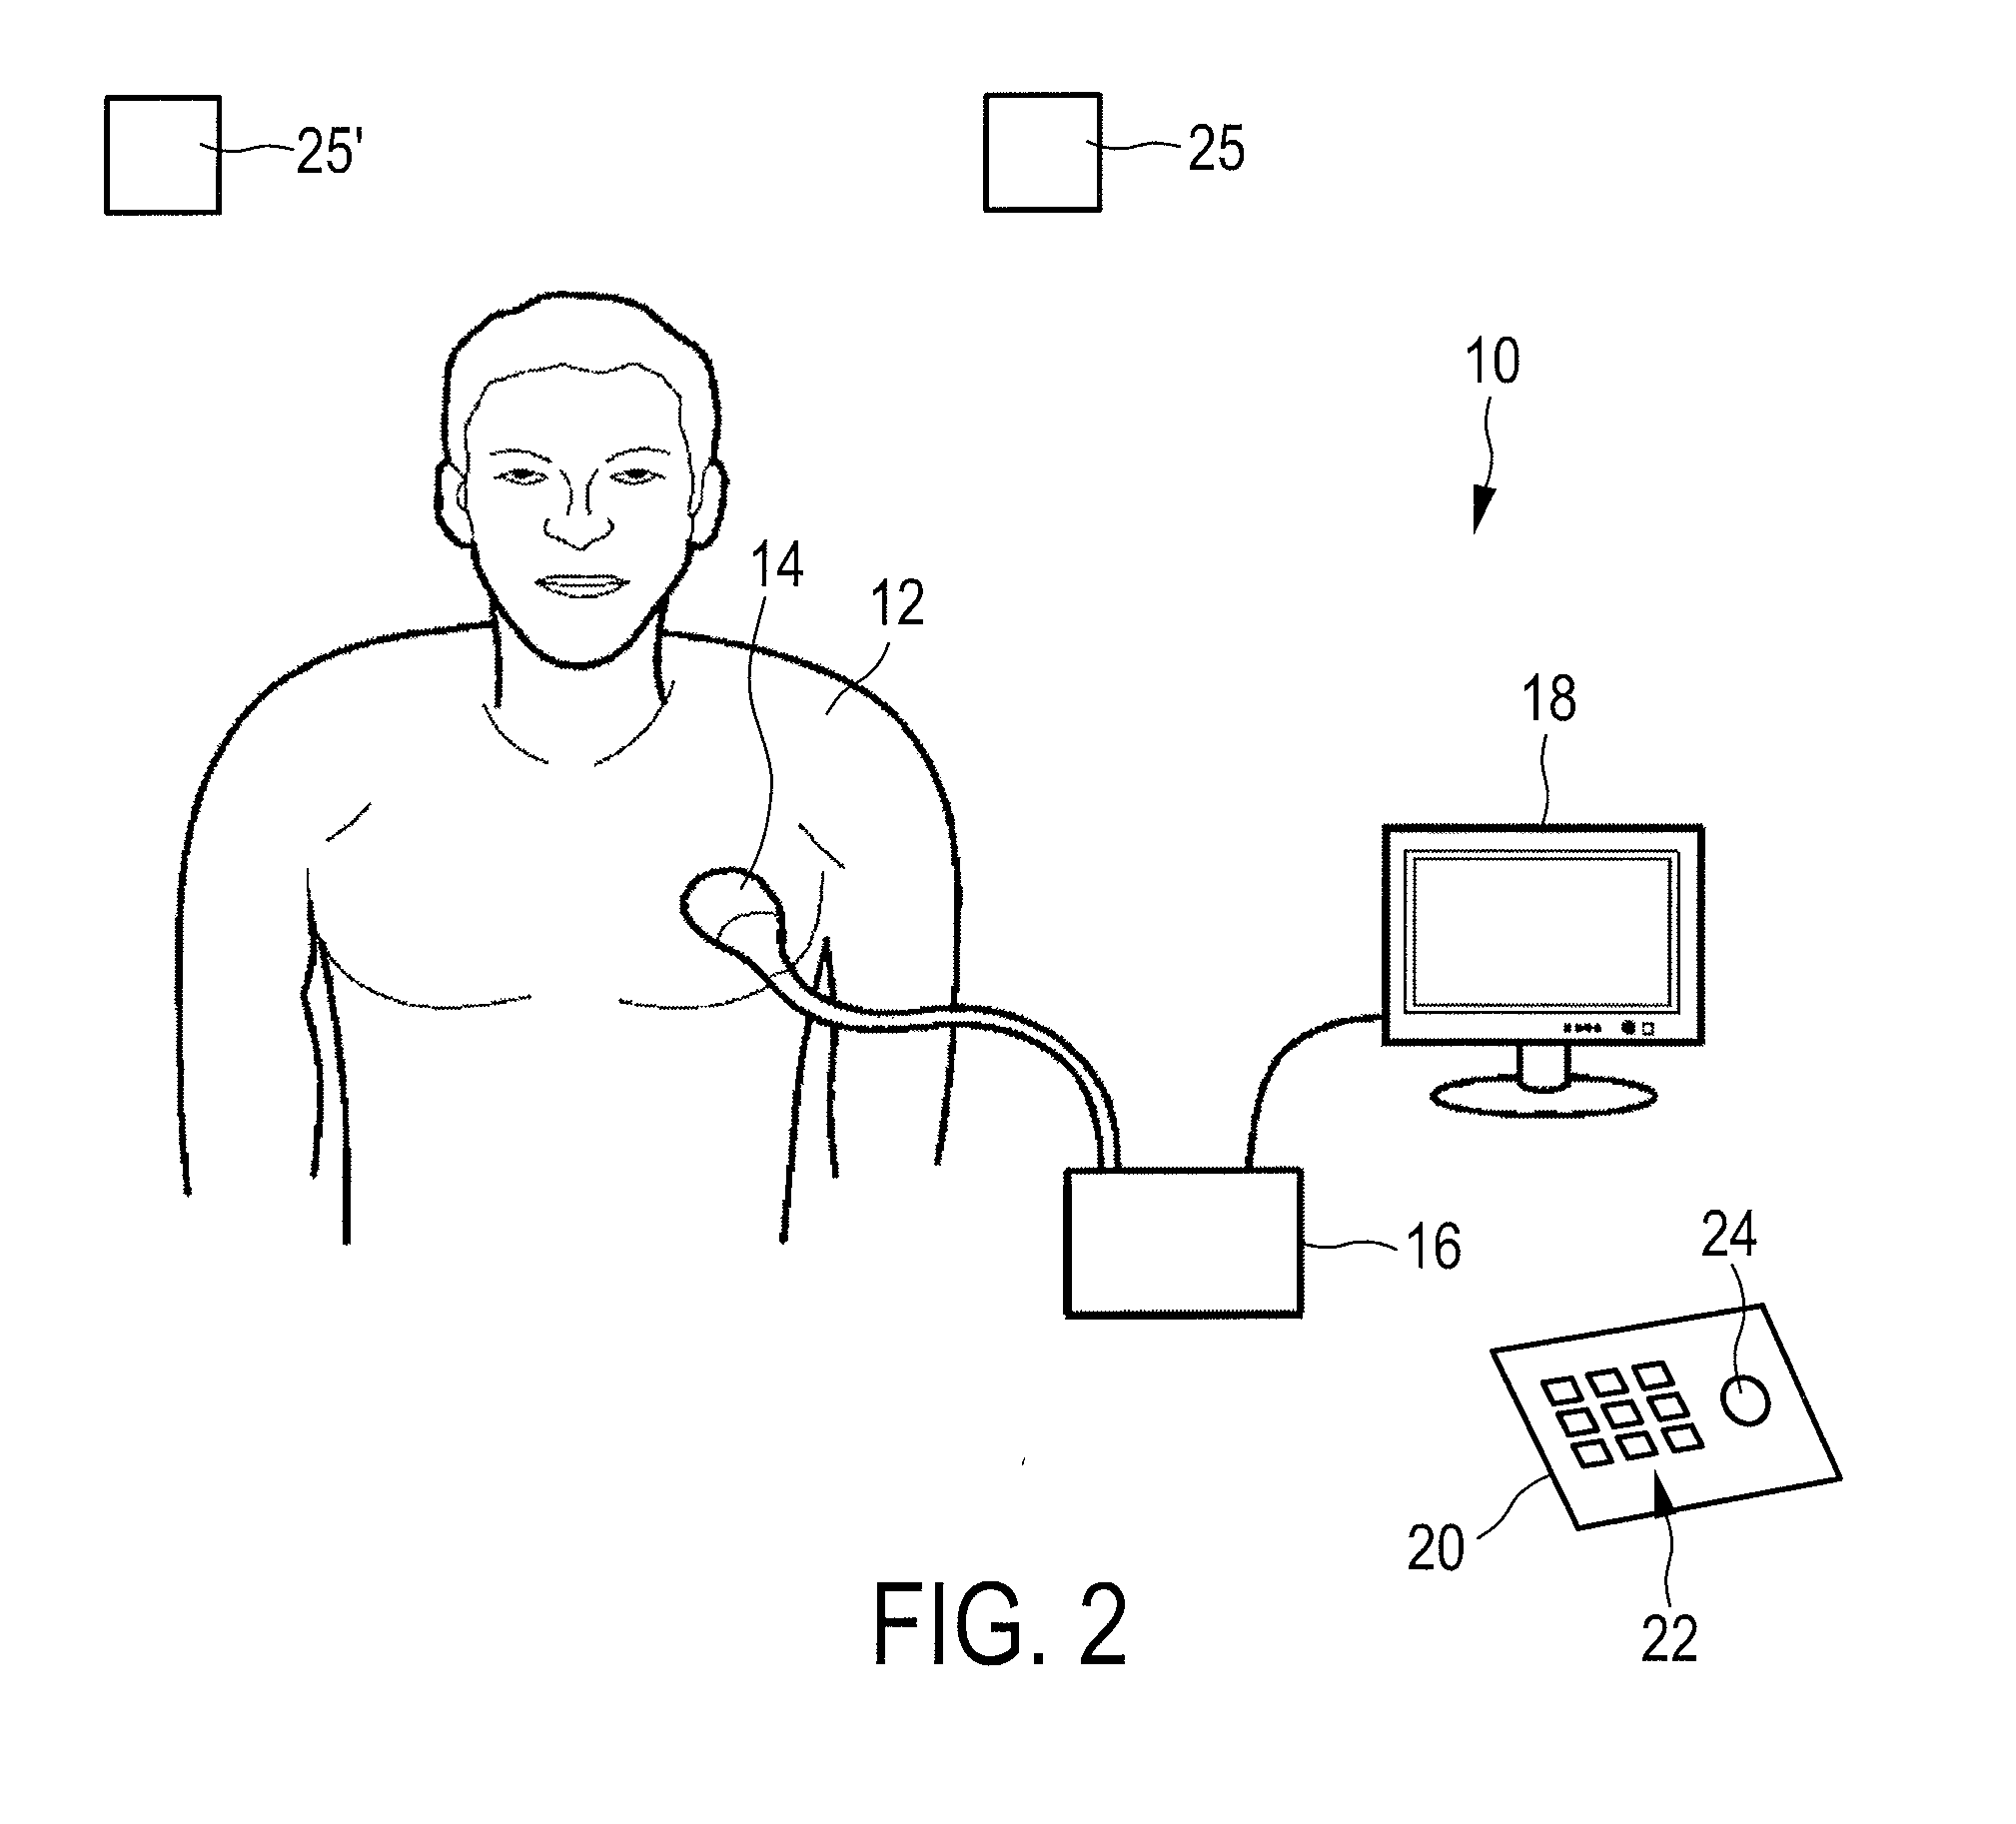 Elastography measurement system and method